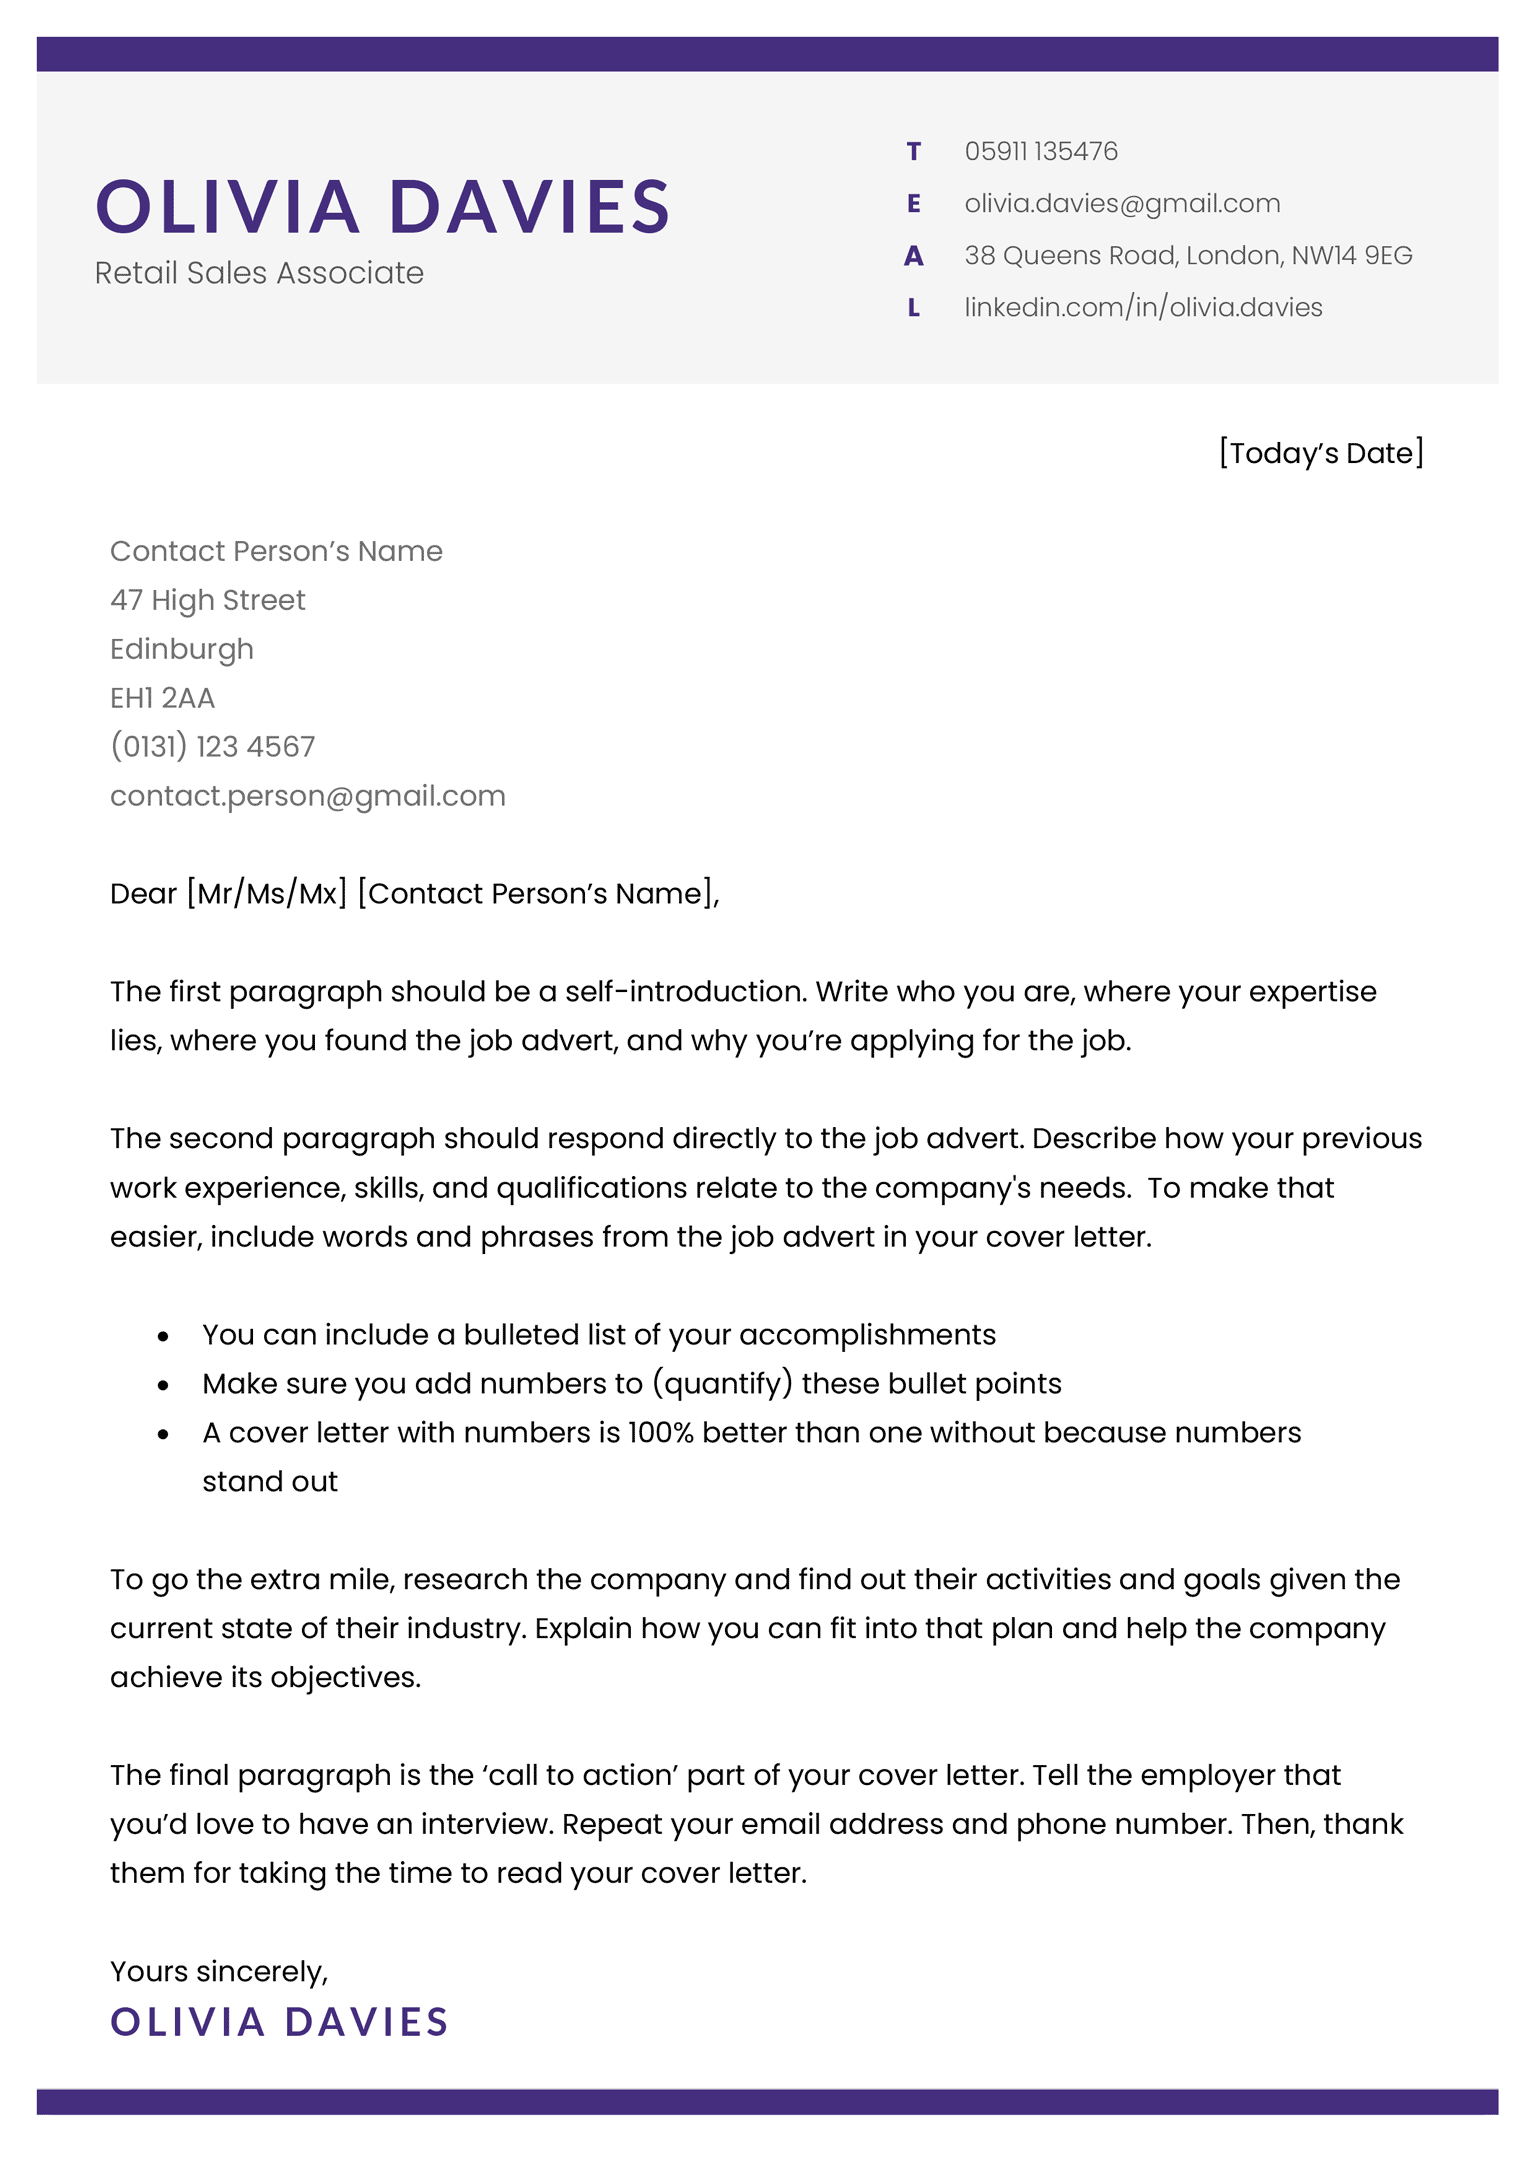 cover letter example cambridge